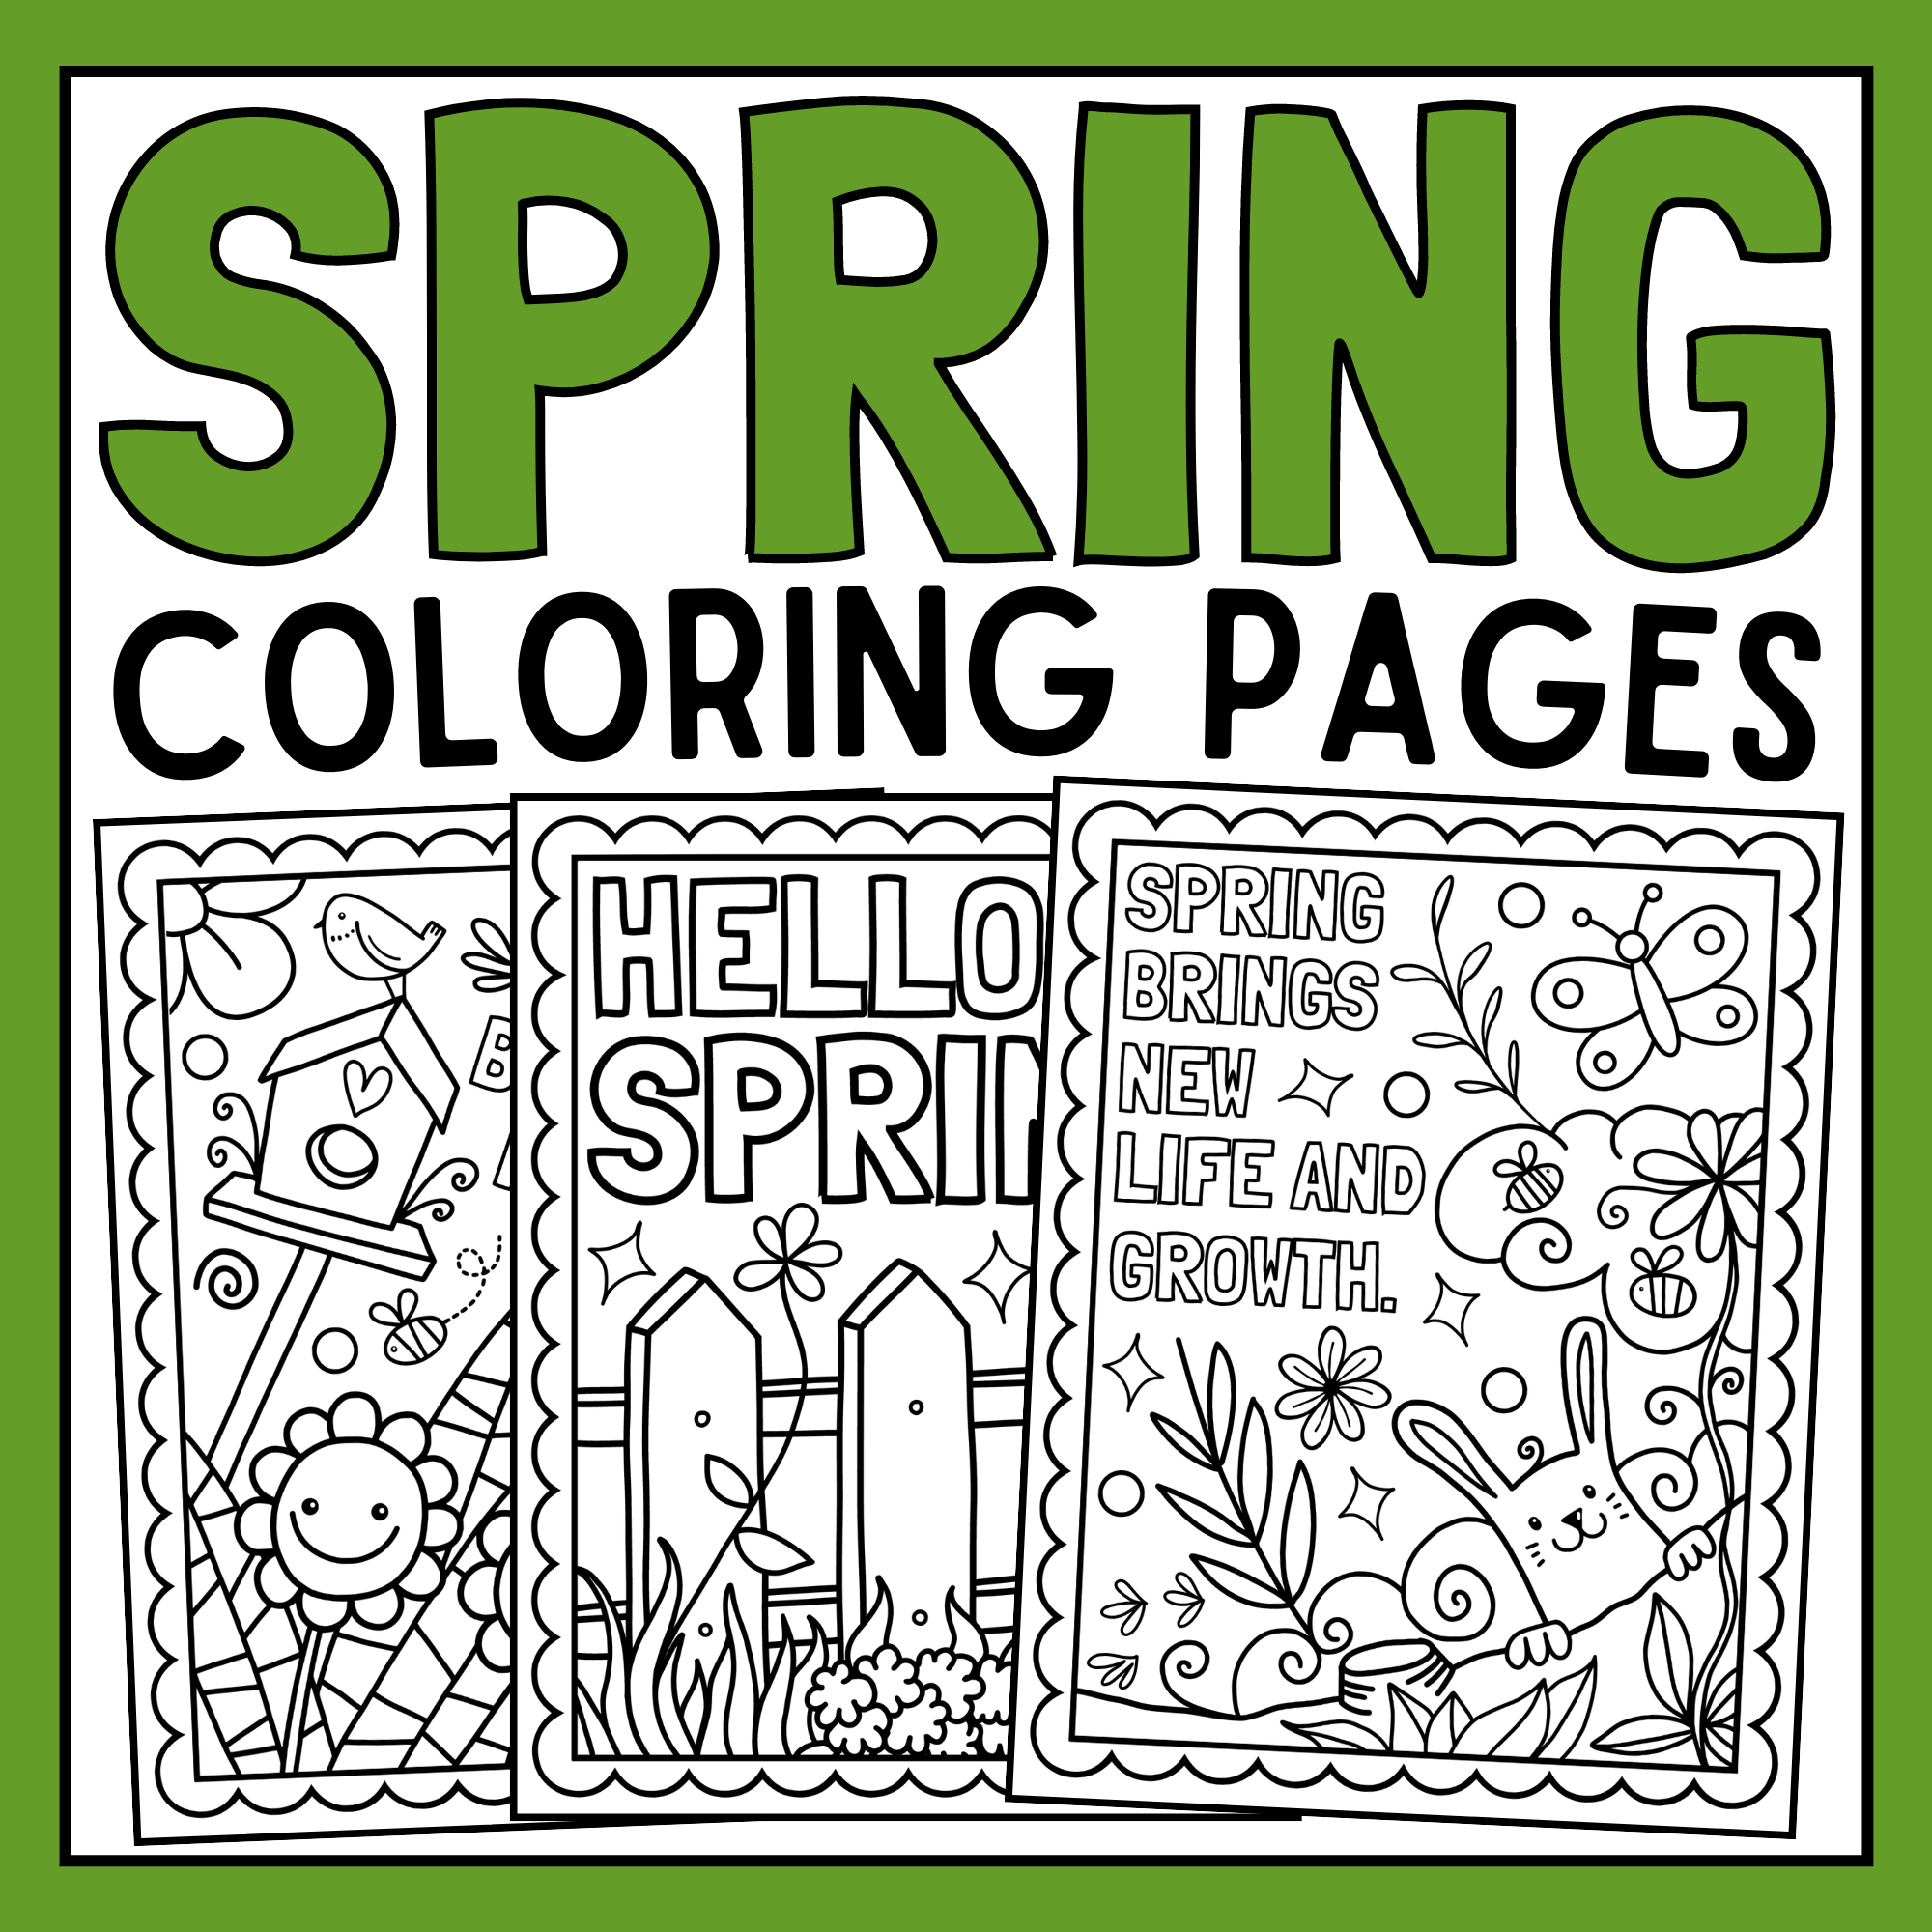 Spring coloring pages spring coloring sheets spring break coloring pages made by teachers